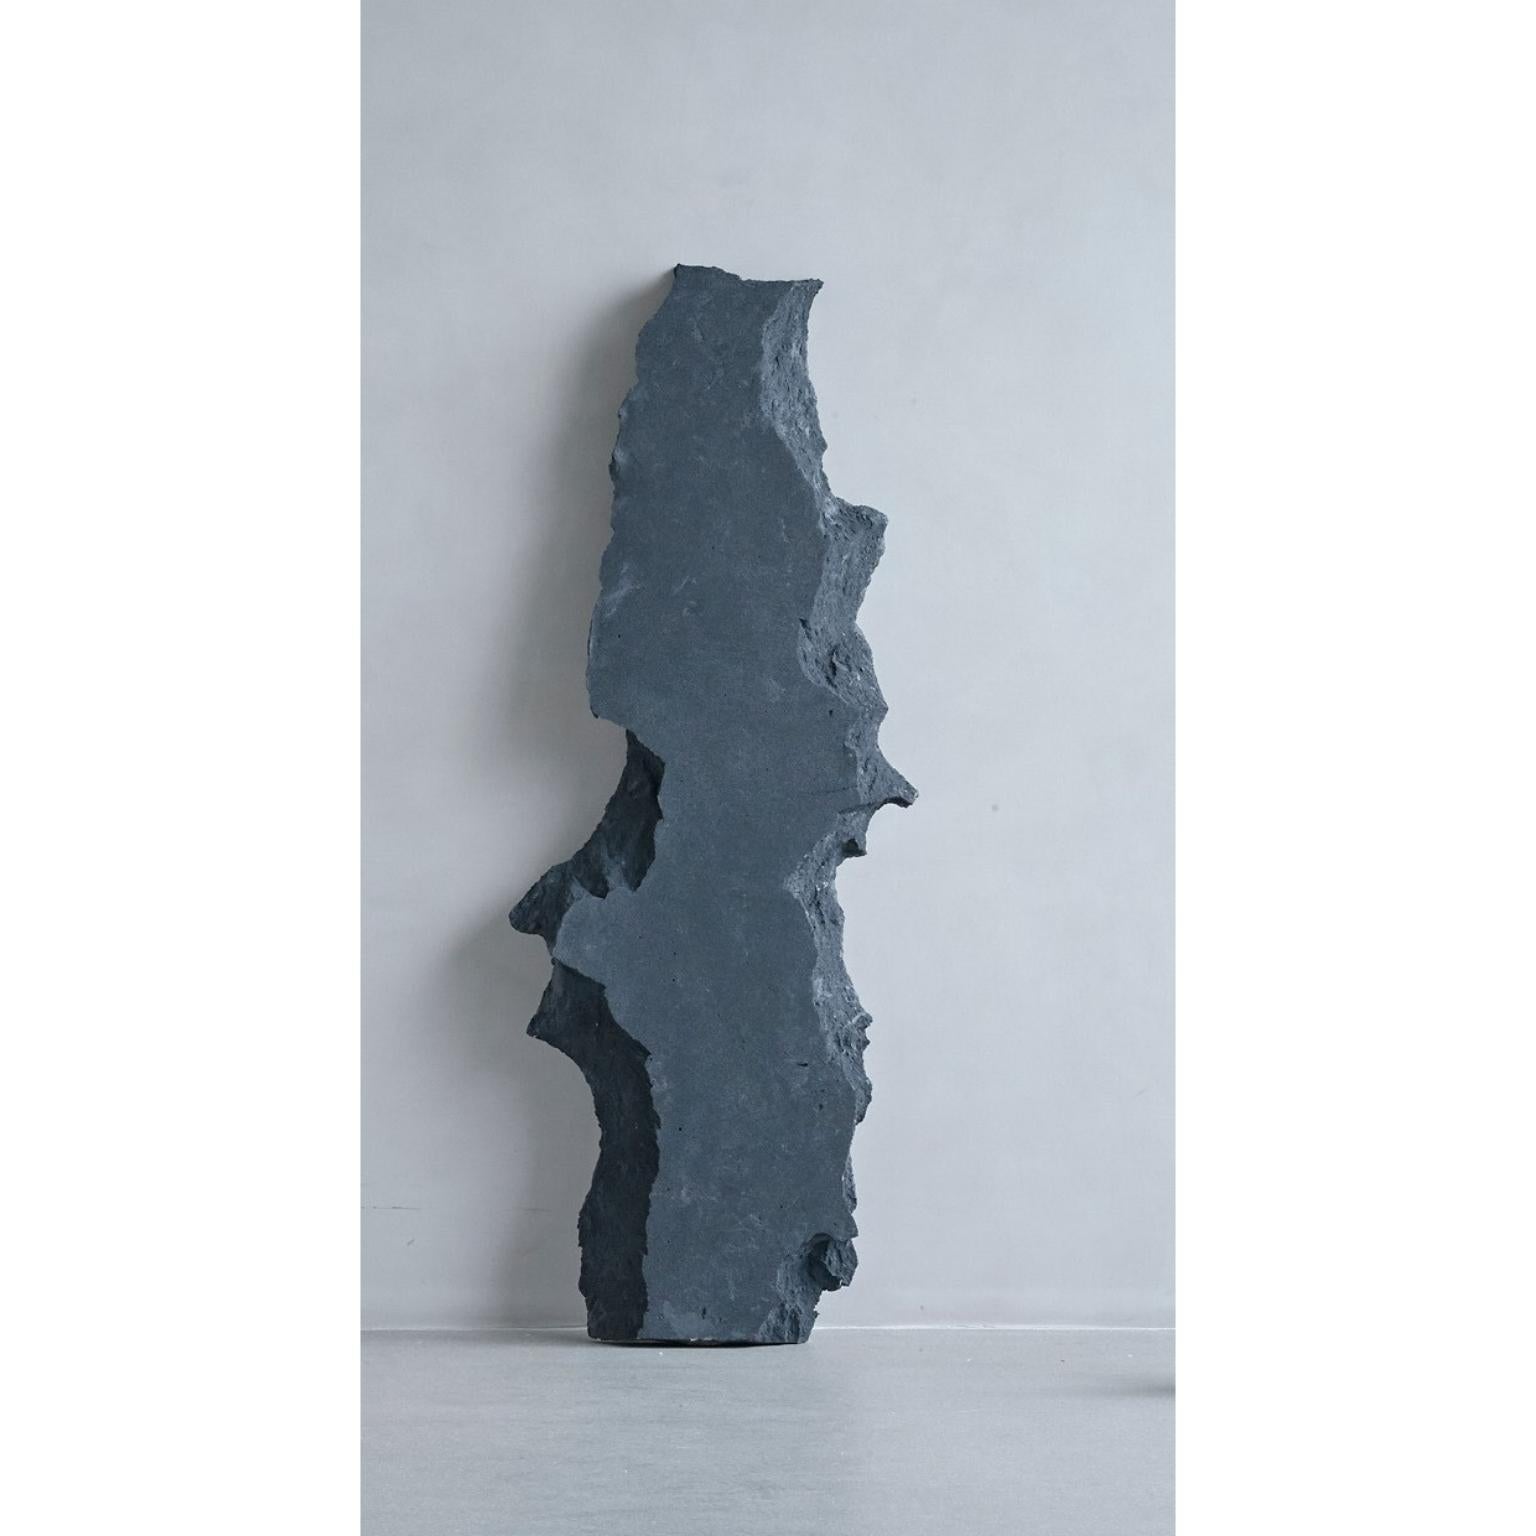 Momentum sculpture by Andredottir & Bobek
Dimensions: L 1400 x B 320 x H 120 cm 
Materials: Reused Foam/Mattress and Jesmontite Hardner in color dark gray.

Our work aims to encourage art and design as symbiotic disciplines, giving us as performers